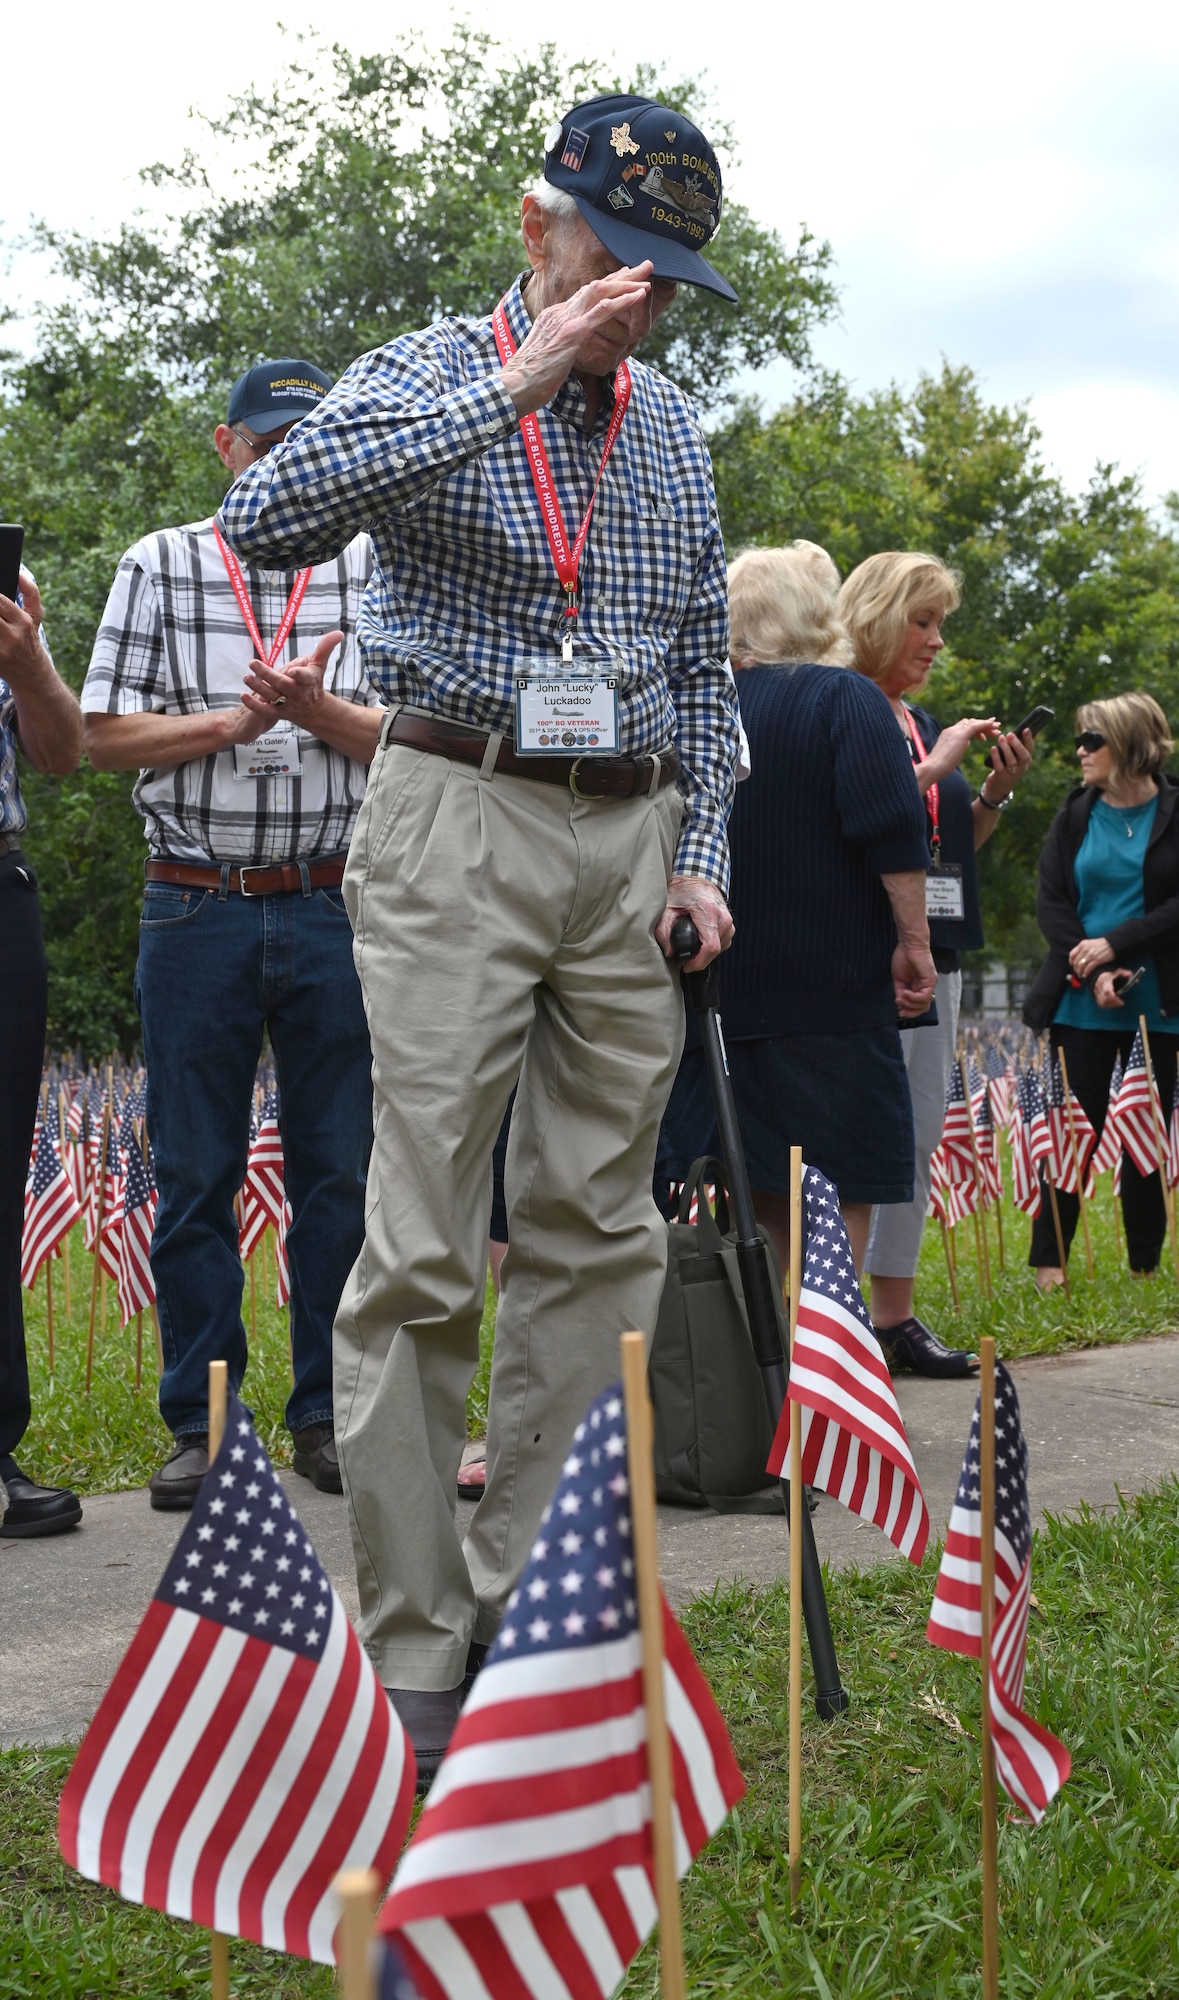 U.S. Army Air Force Capt. John “Lucky” Luckadoo, 100th Bomb Group pilot and World War II survivor, salutes the flag after placing it during the Flags for the Fallen ceremony at the 100th Bomb Group reunion, National Museum of the Mighty Eighth Air Force in Savannah, Georgia, May 25, 2023. Twenty-six-thousand flags were placed leading up to Memorial Day to honor those men from the Eighth Air Force who lost their lives and never made it home. Of those, 757 were from the 100th Bomb Group. (U.S. Air Force photo by Karen Abeyasekere)